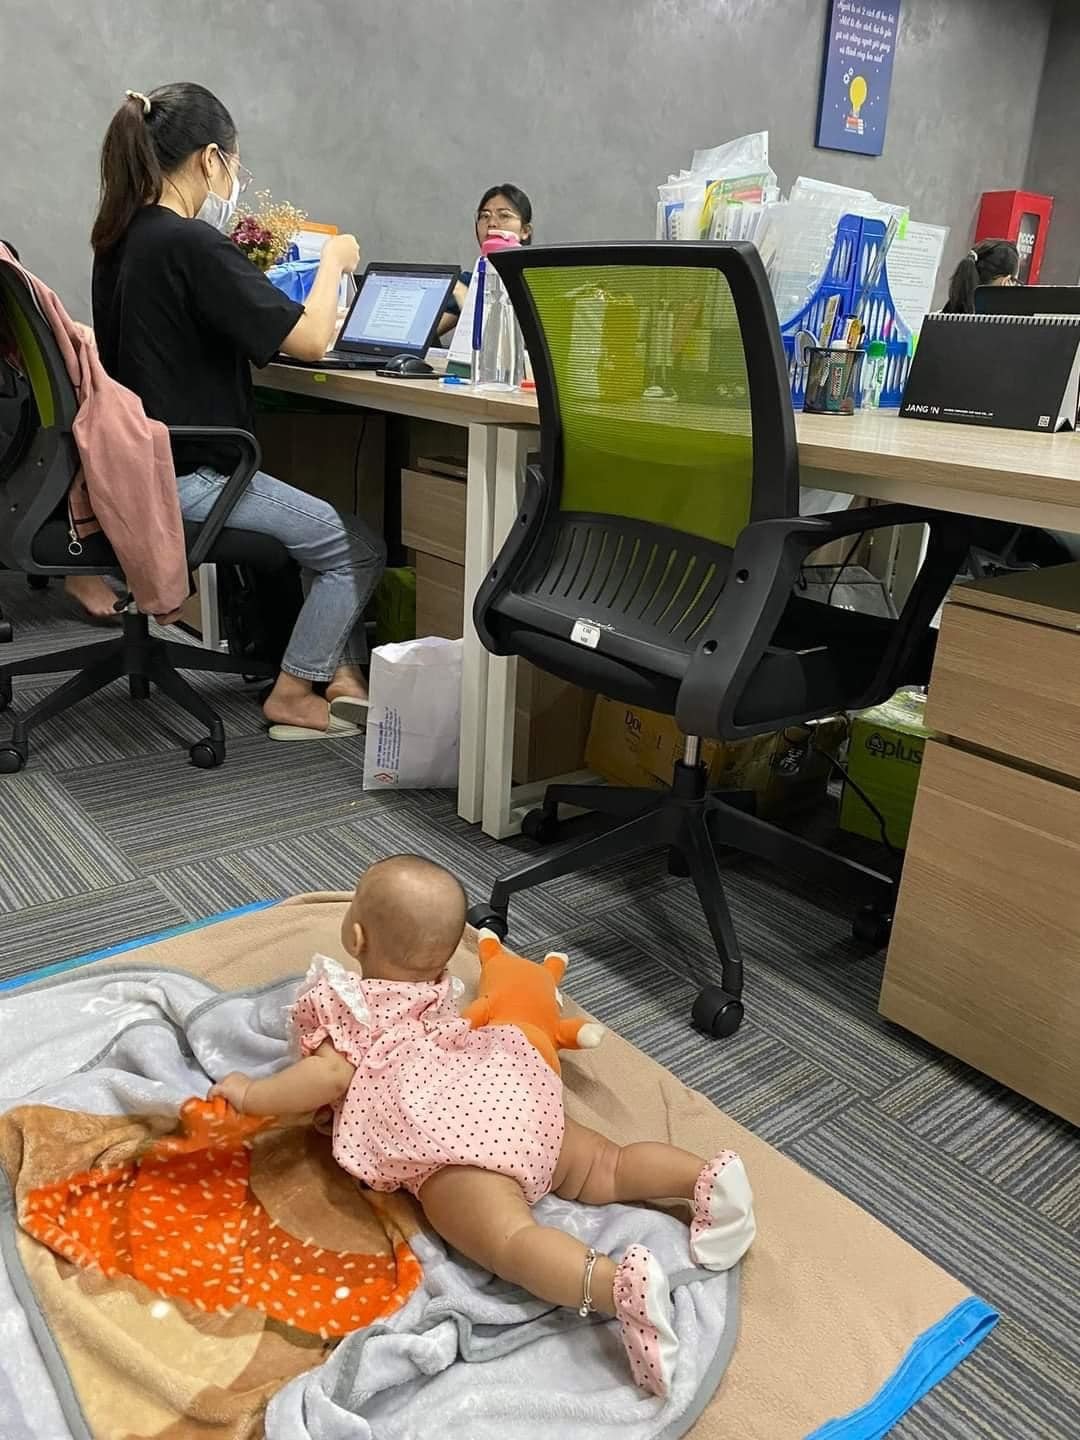 A rare sight of a baby swinging around in the middle of the office, many people empathize with his mother after the maternity leave